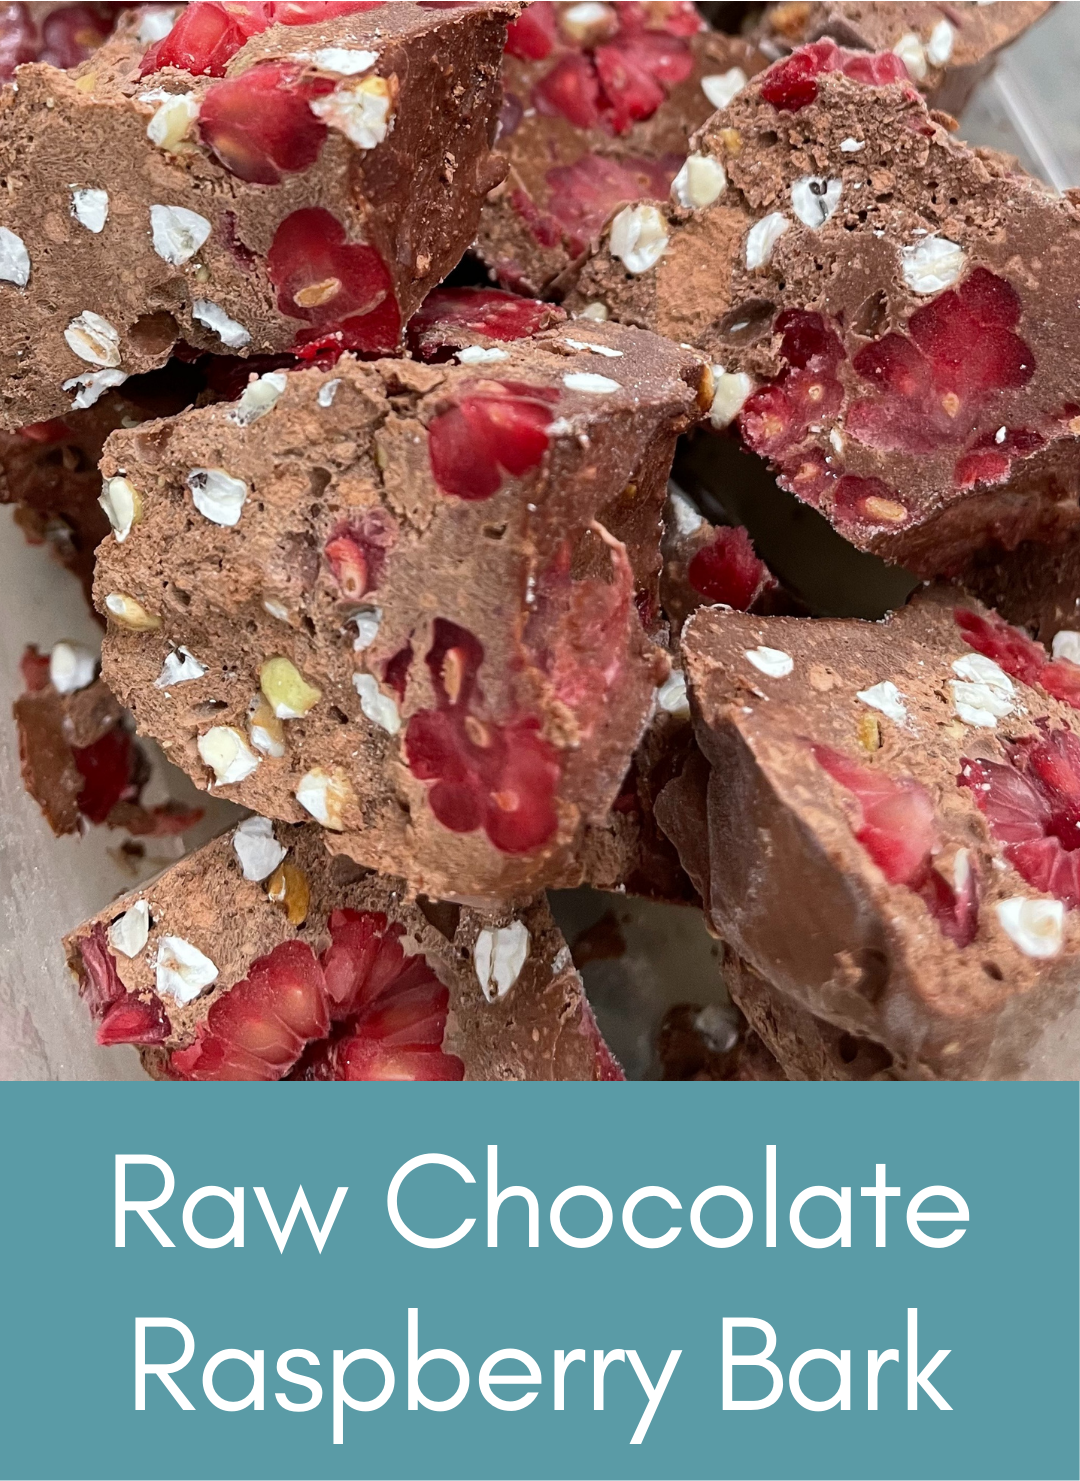 Whole food plant based vegan raw chocolate raspberry bark Picture with link to recipe